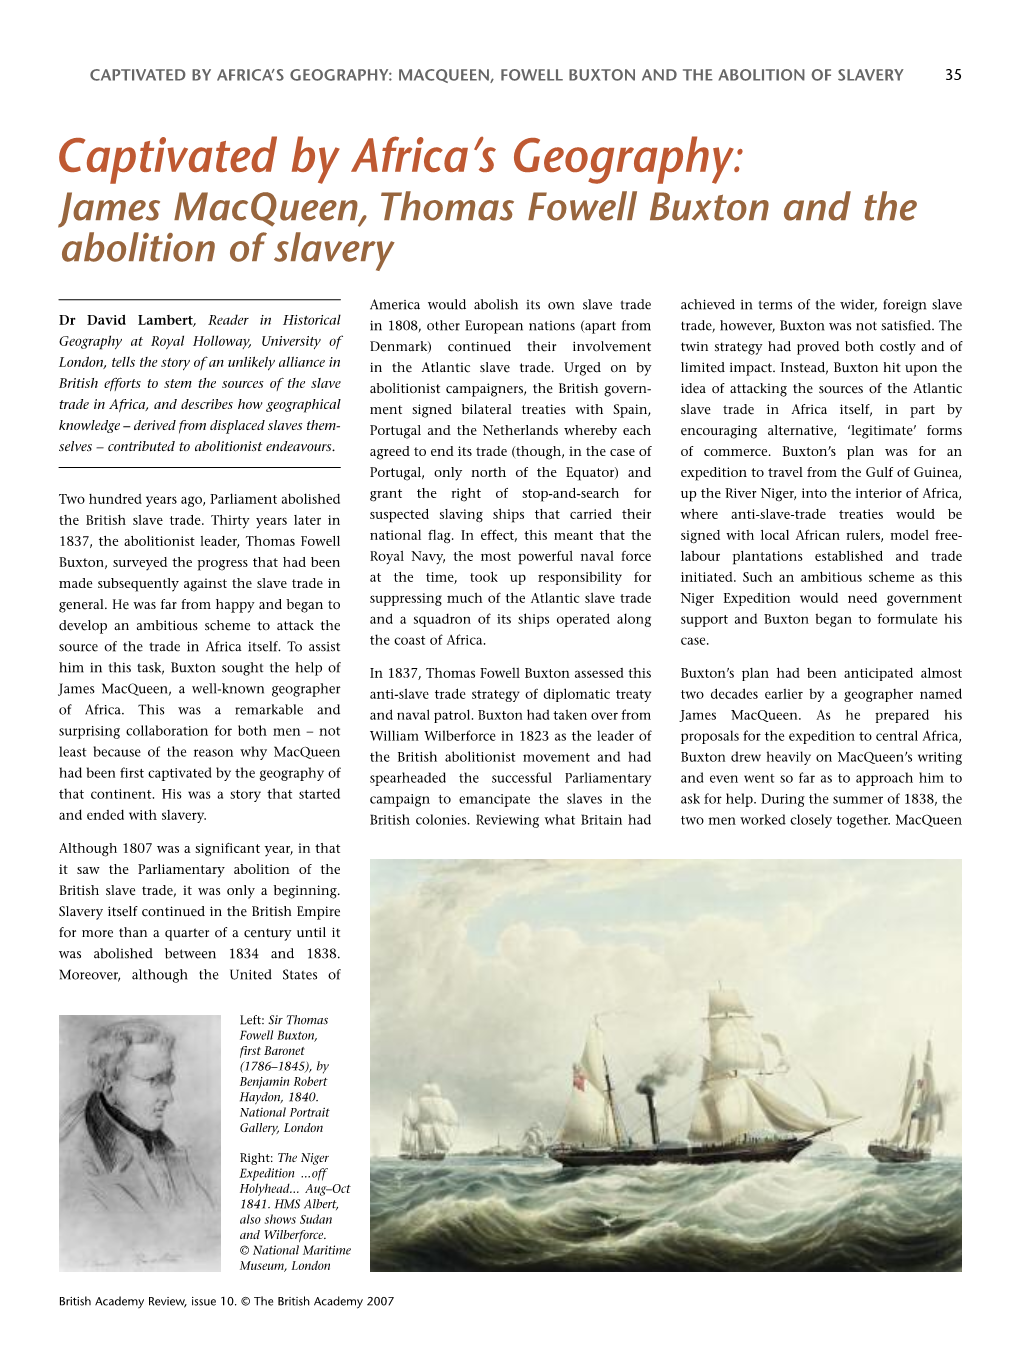 James Macqueen, Thomas Fowell Buxton and the Abolition of Slavery